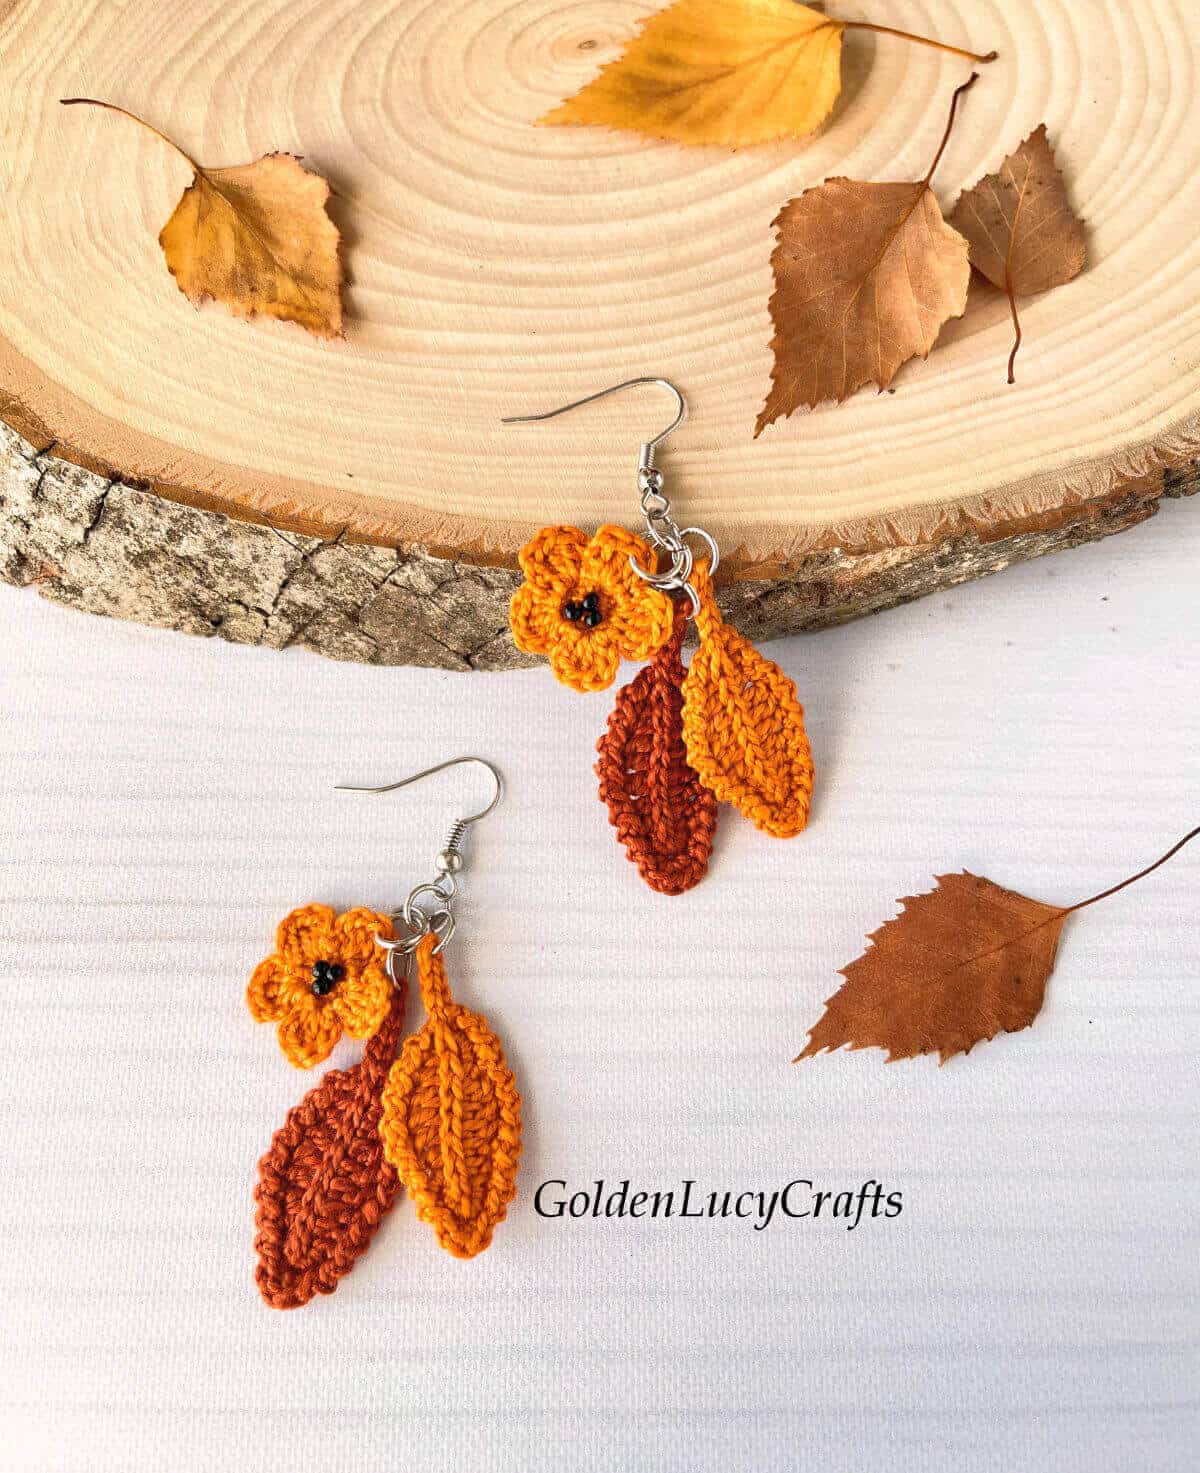 Crocheted earrings, wood slice and fall leaves in the background.